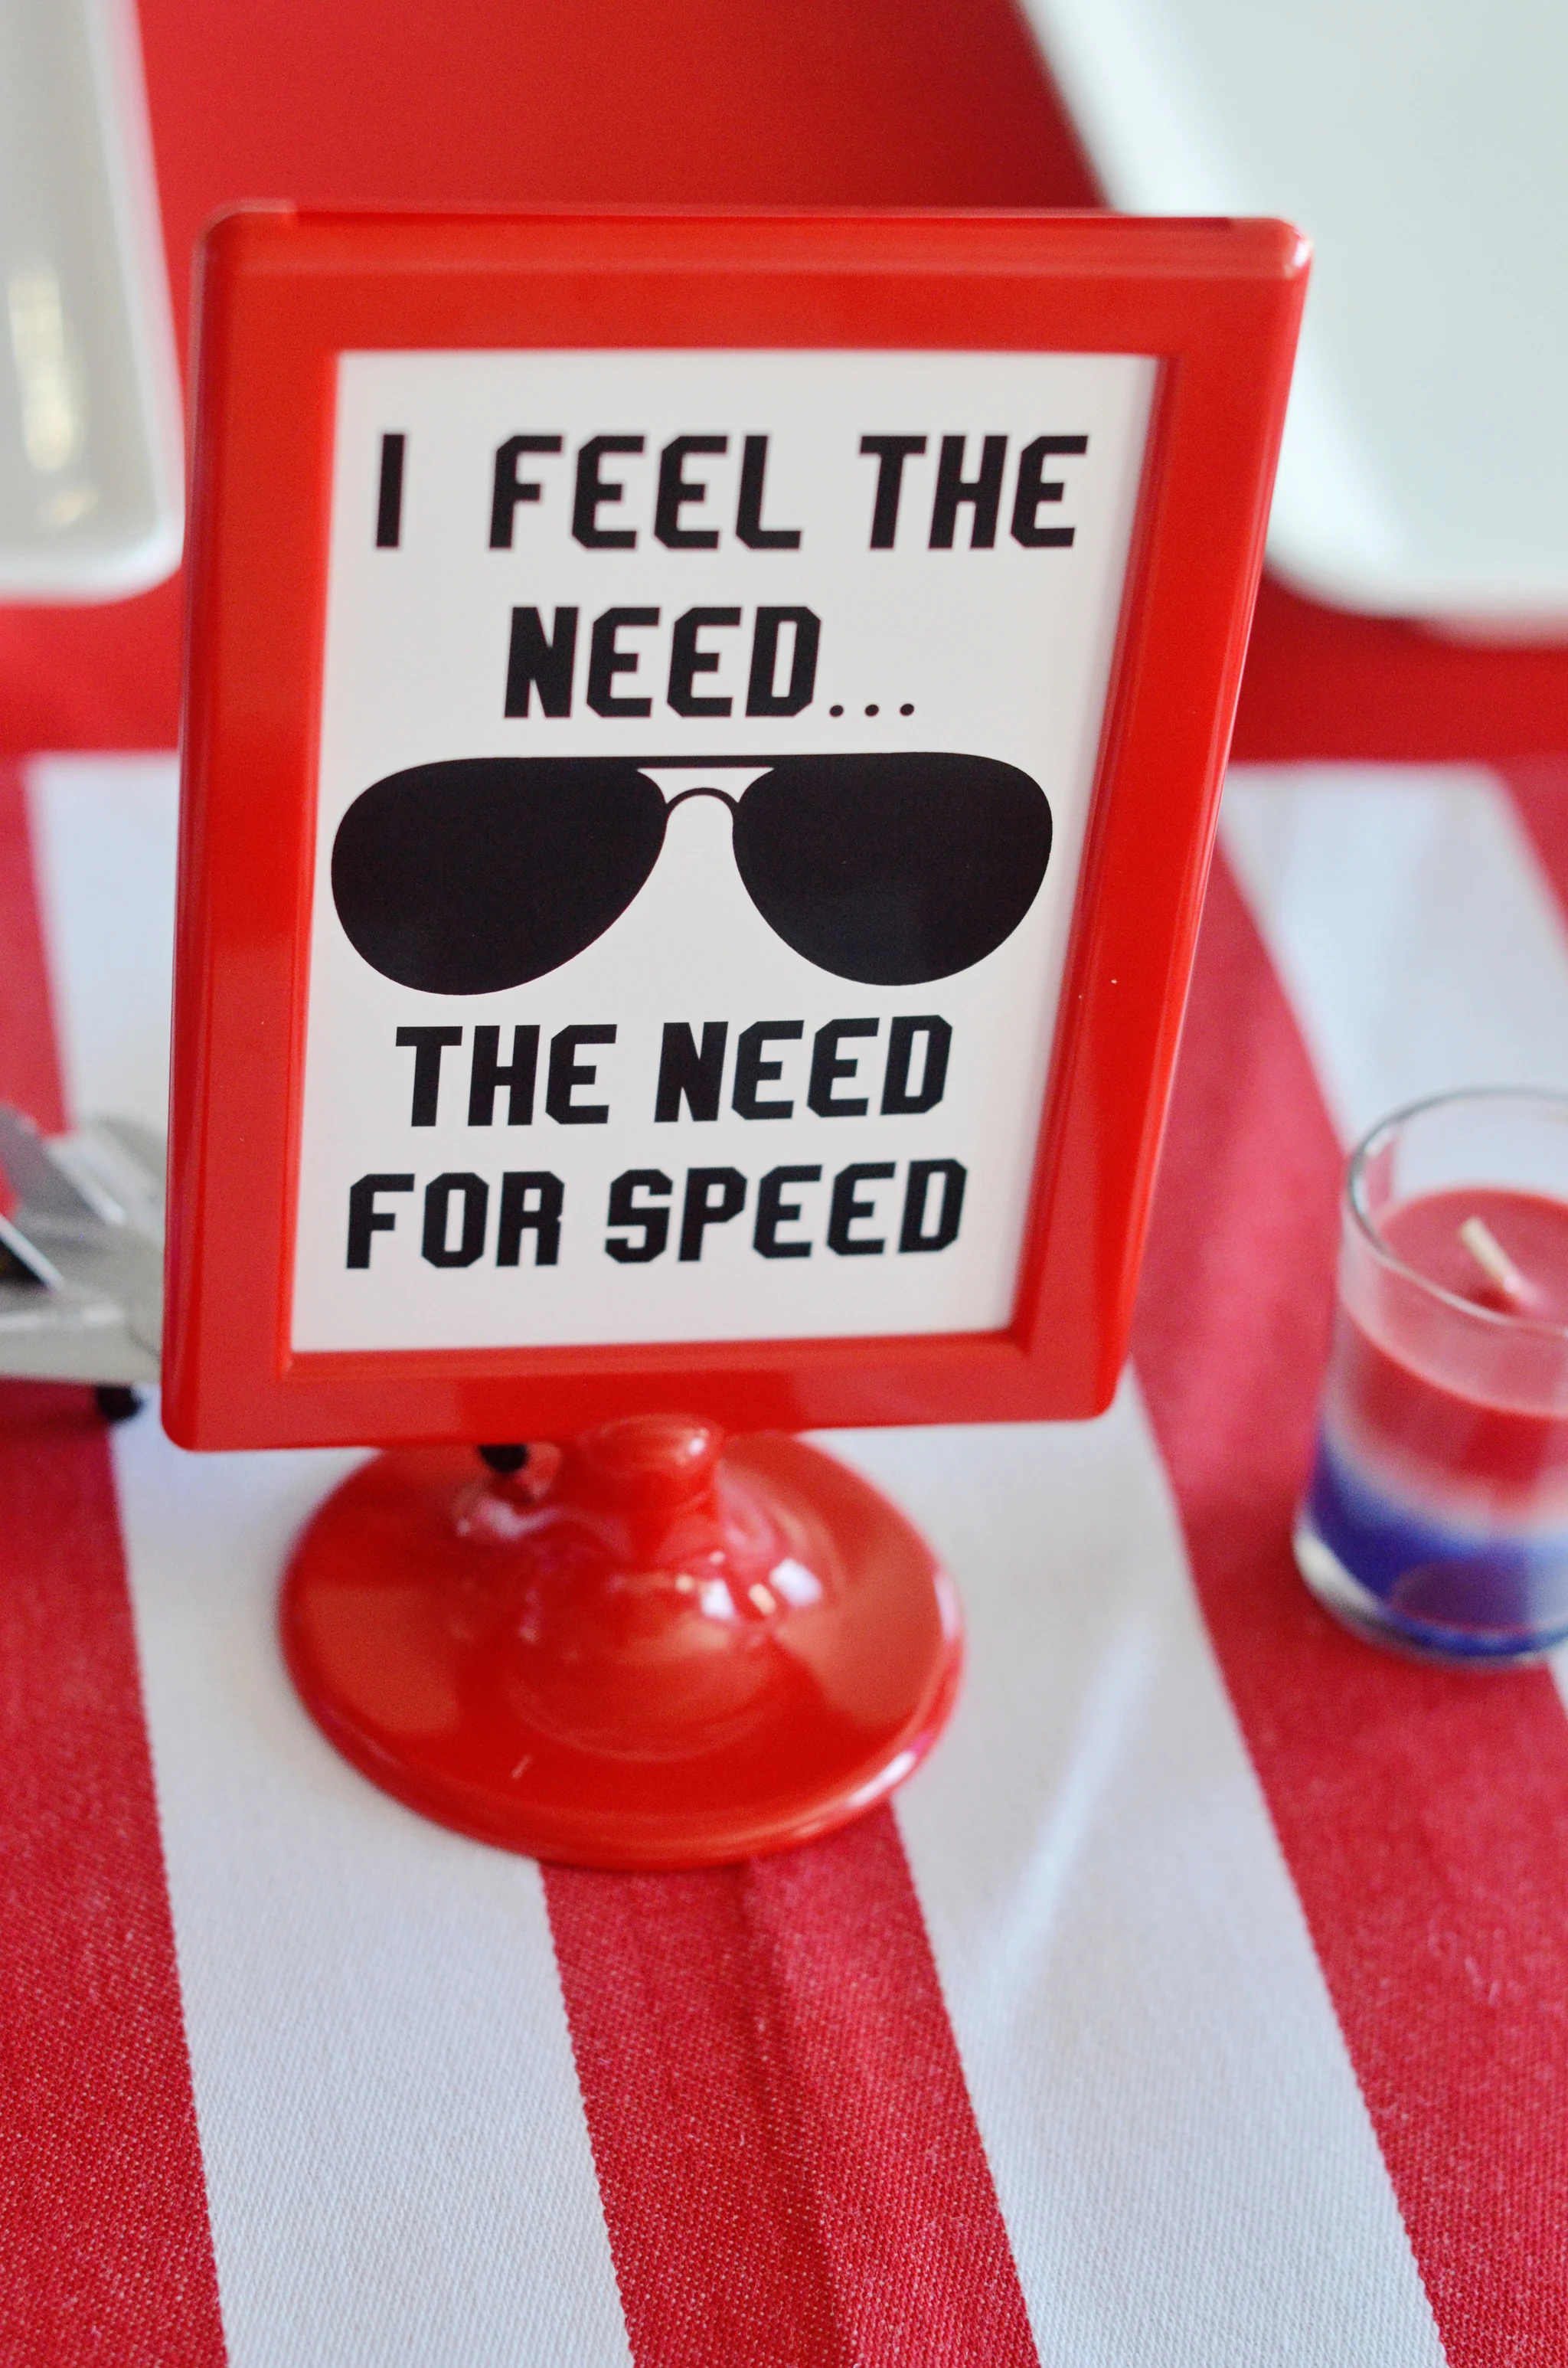 Do you feel the need, the need for speed? - Project Nursery